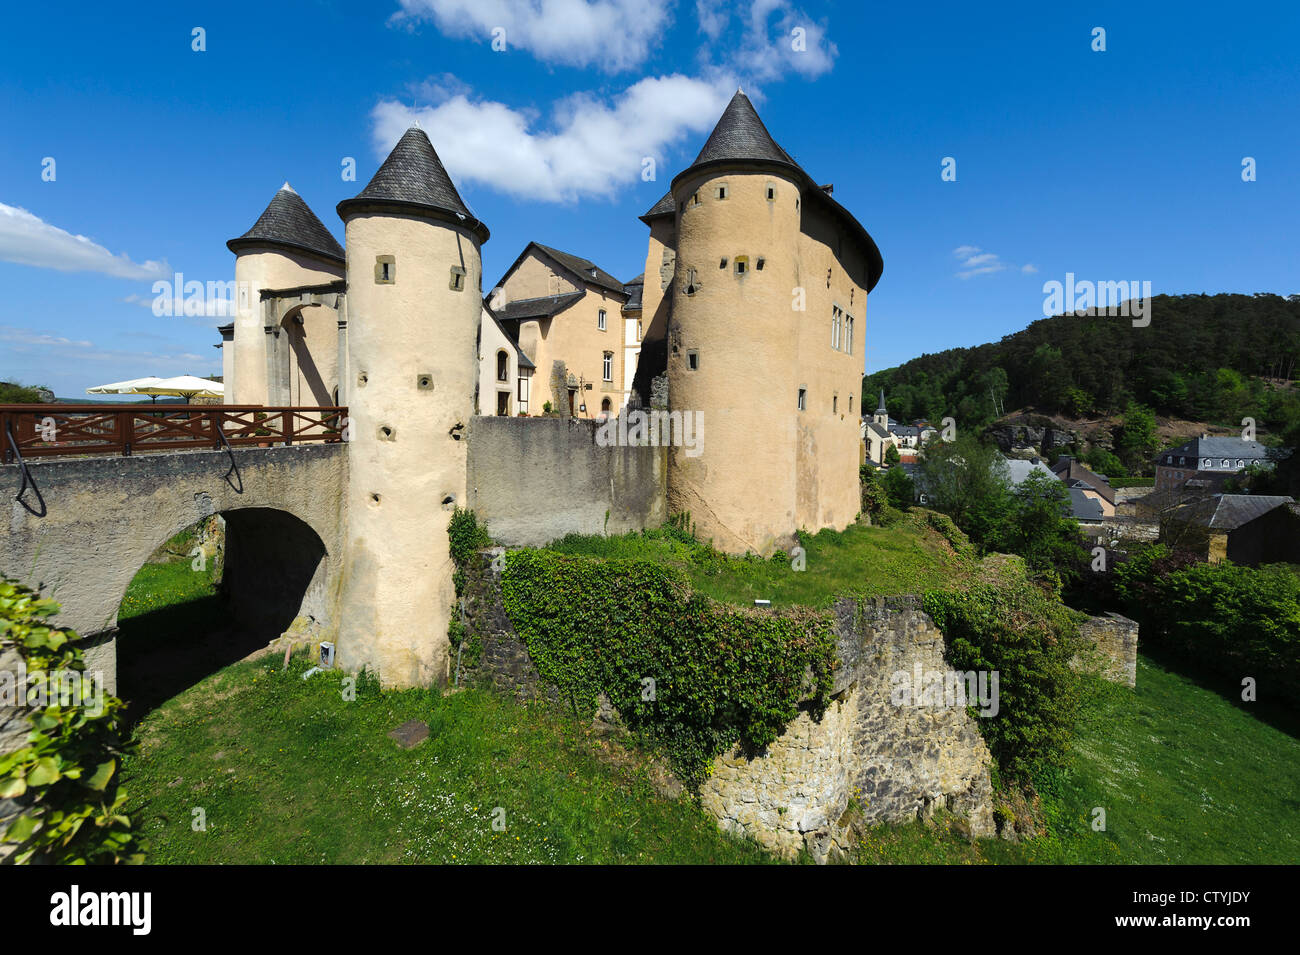 Castle in in Bourglinster, Luxembourg Stock Photo